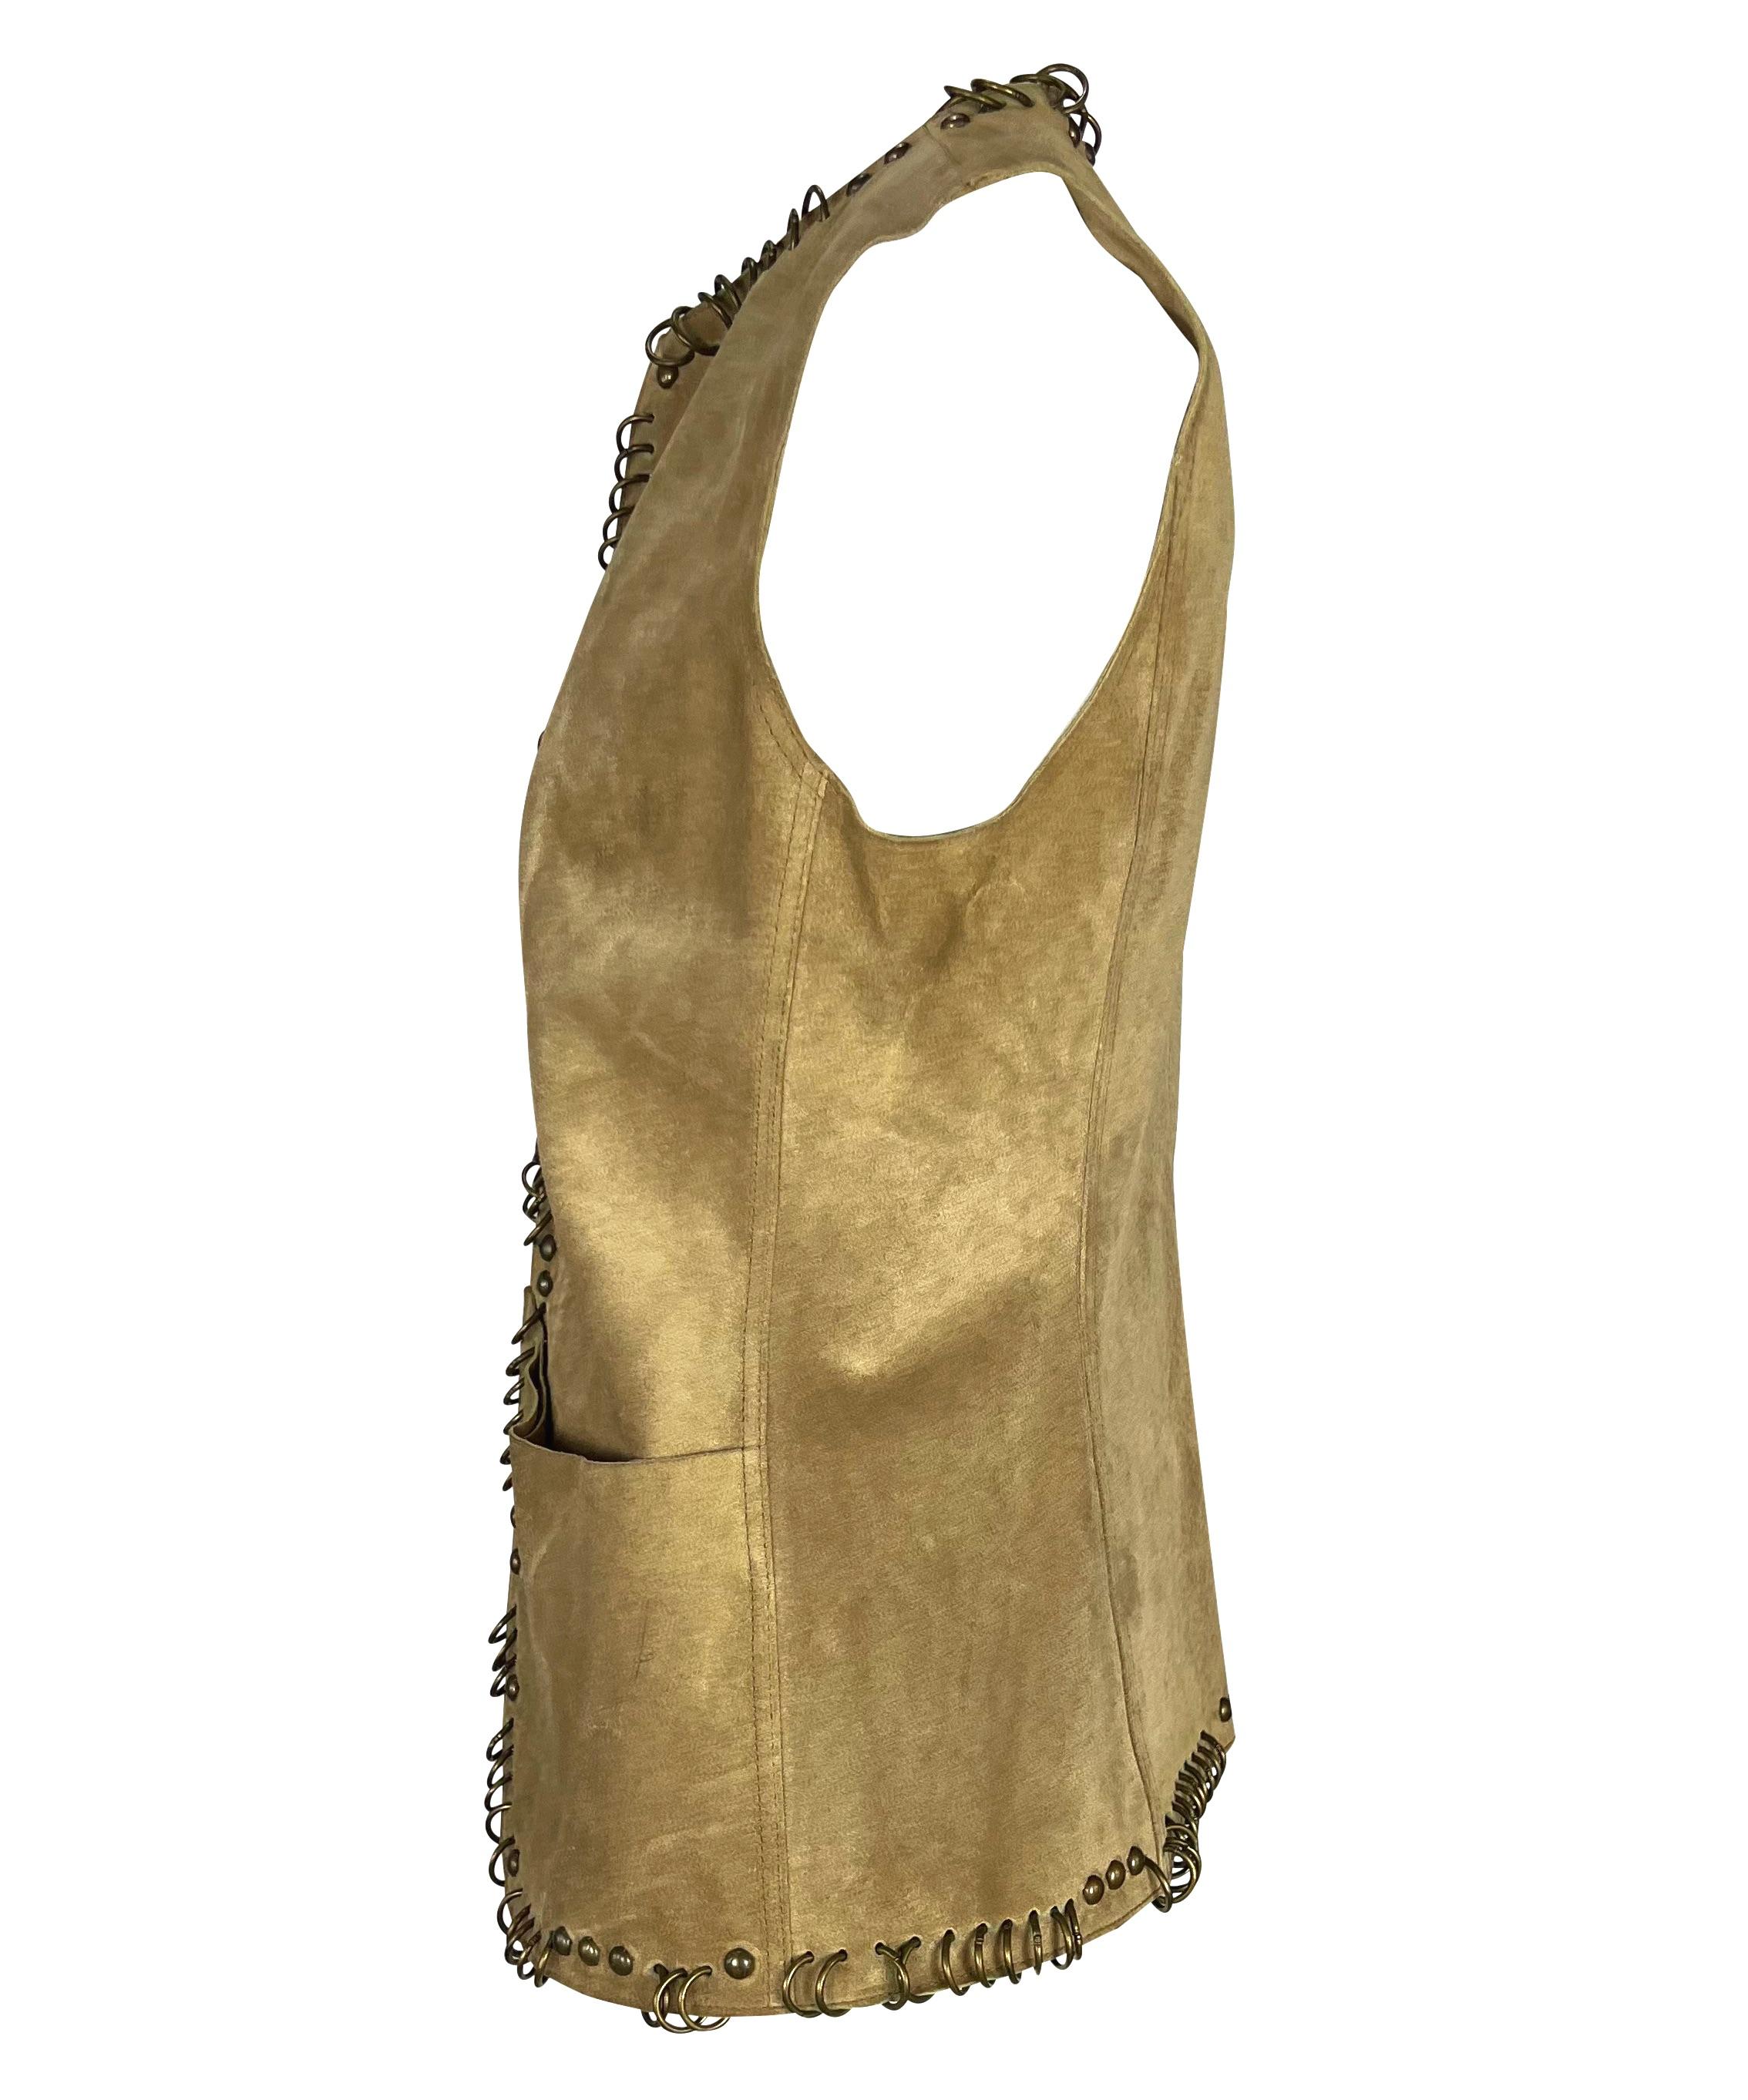 S/S 2002 Yves Saint Laurent by Tom Ford Safari Distressed Suede Studded Vest For Sale 1